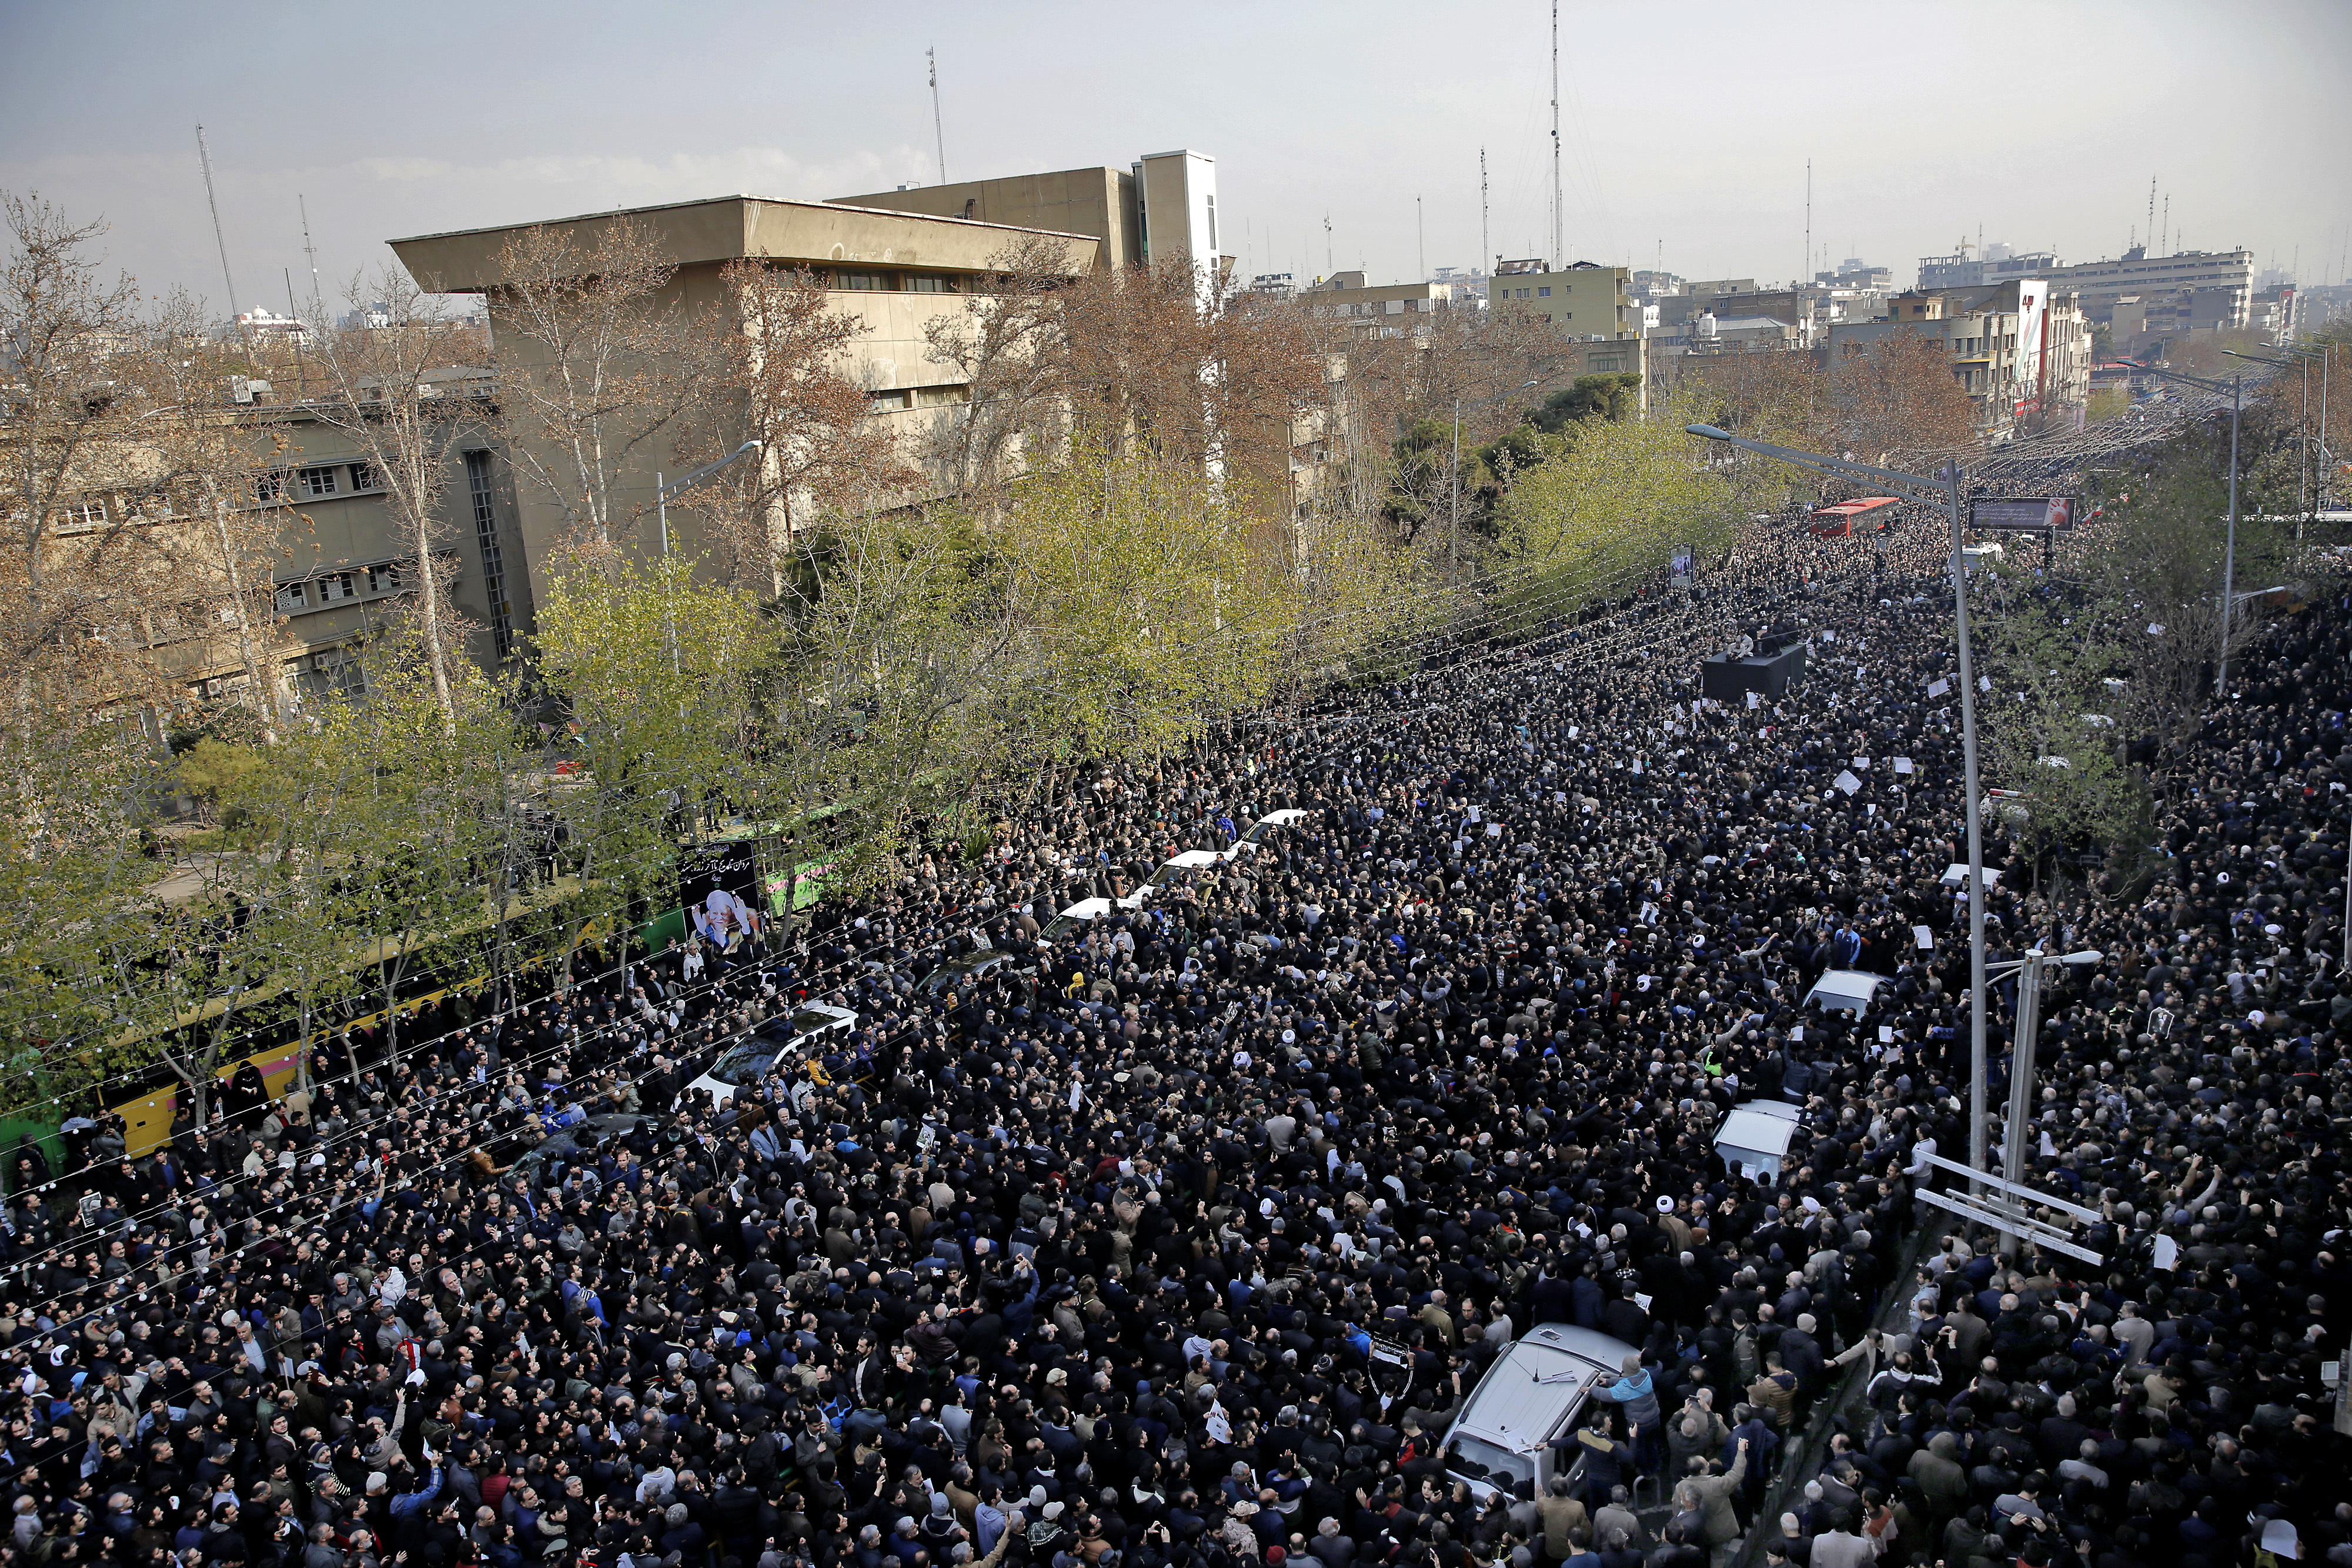 Iranians attend the funeral of former Iranian President Akbar Hashemi Rafsanjani, as his coffin is carried on a truck, in Tehran, Iran, Tuesday, Jan. 10, 2017. Hundreds of thousands of mourners have flooded the streets of Tehran, beating their chests and wailing in grief for Rafsanjani, who died over the weekend at the age of 82. The crowds have filled main thoroughfares of the capital as top government and clerical officials held a funeral service at Tehran University. (AP Photo/Ebrahim Noroozi)